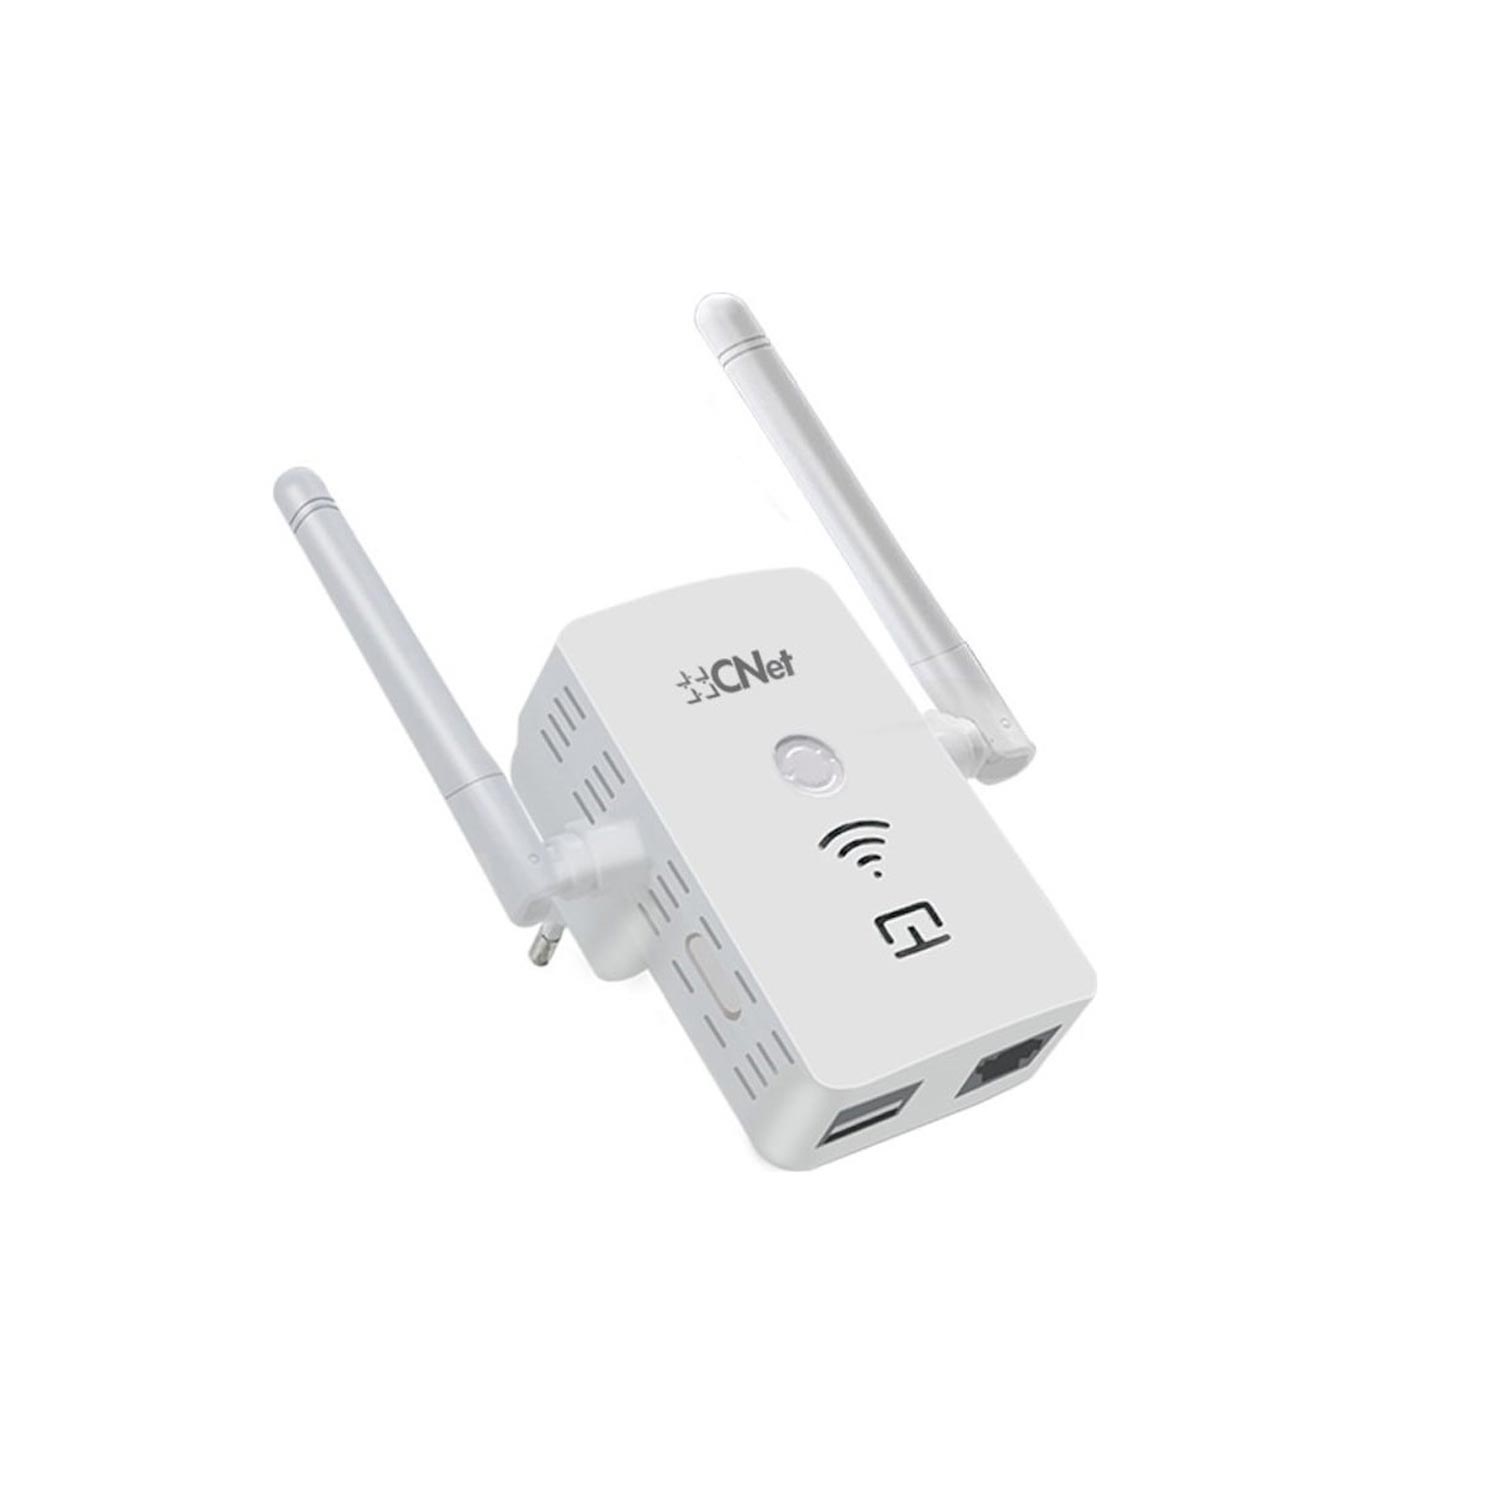 ACCESS POINT REPEATER 300MBPS CNET-WNIX3300L